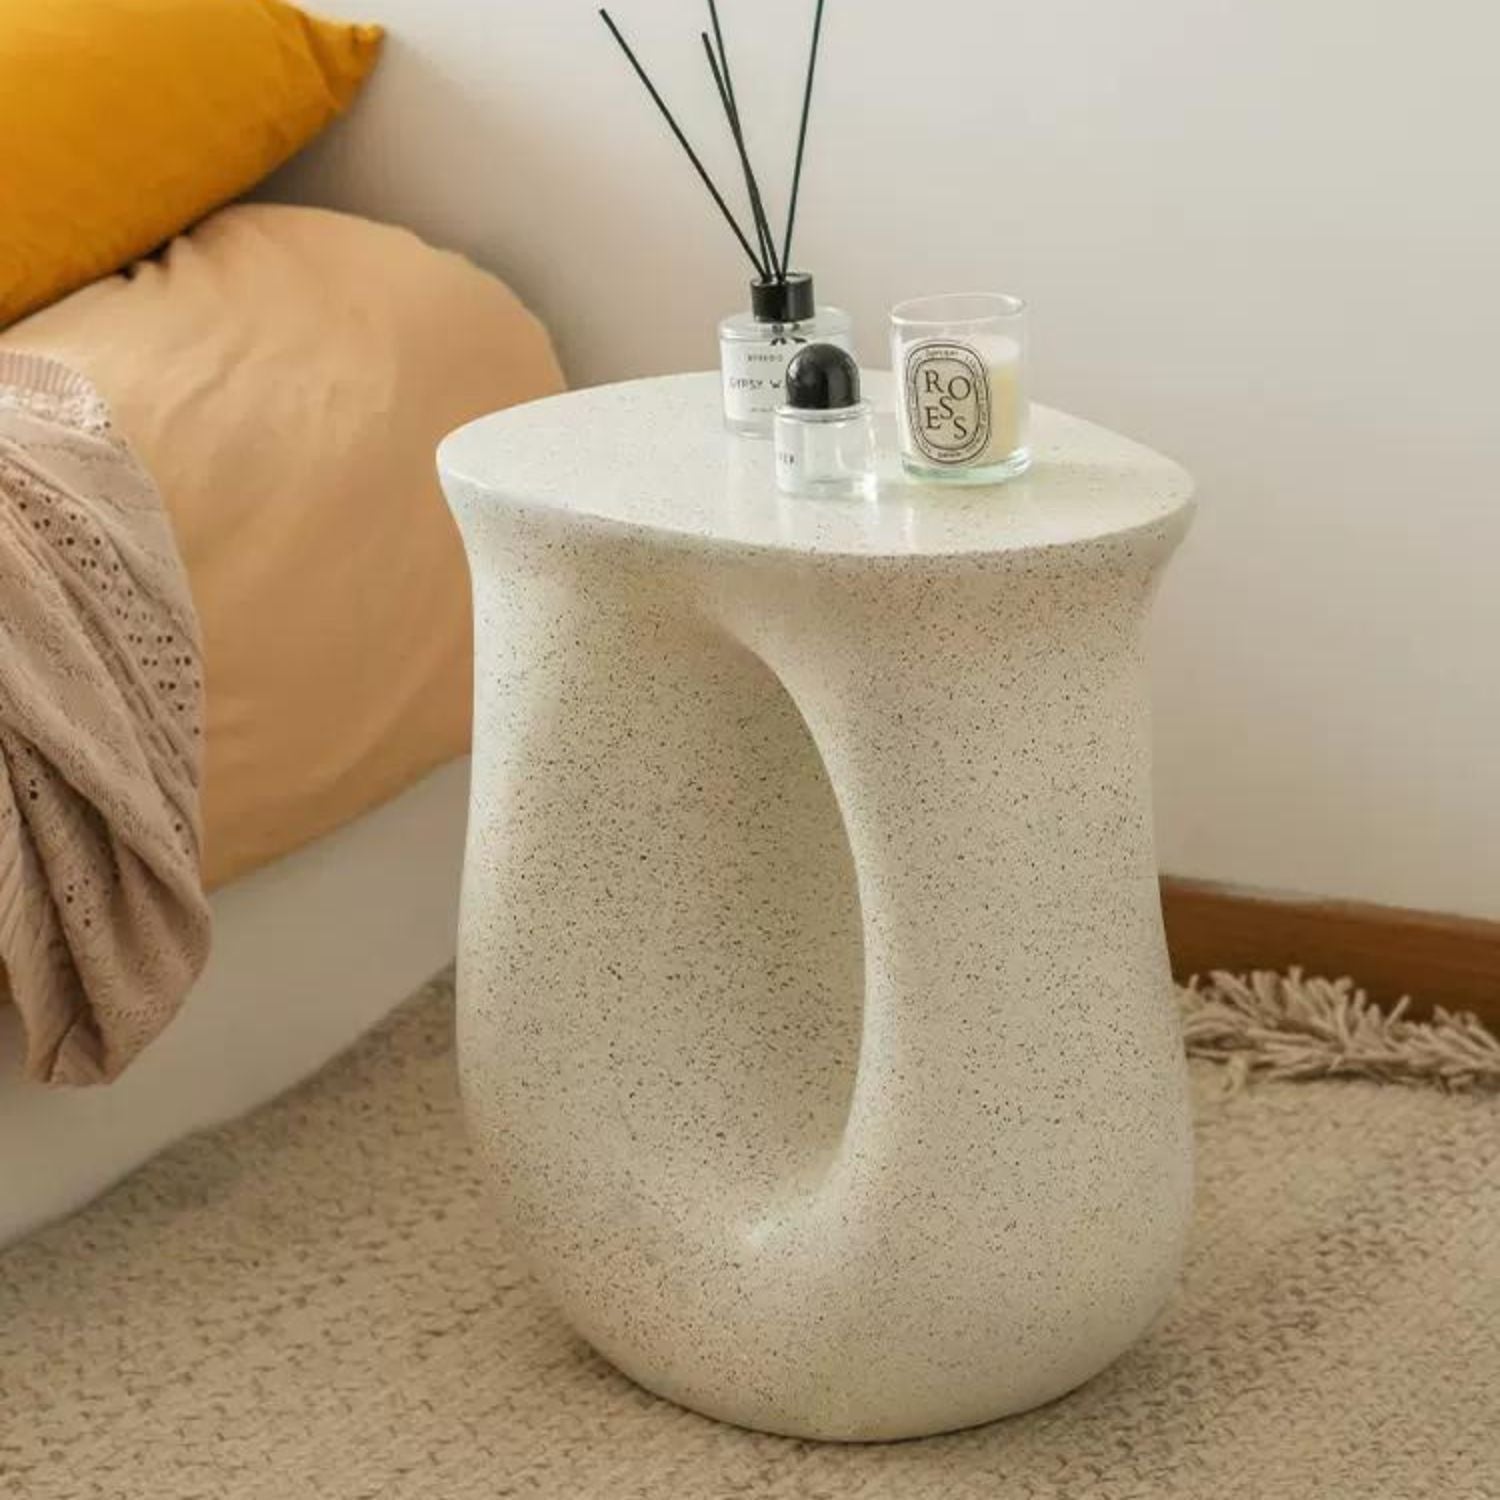 Dune Side Table